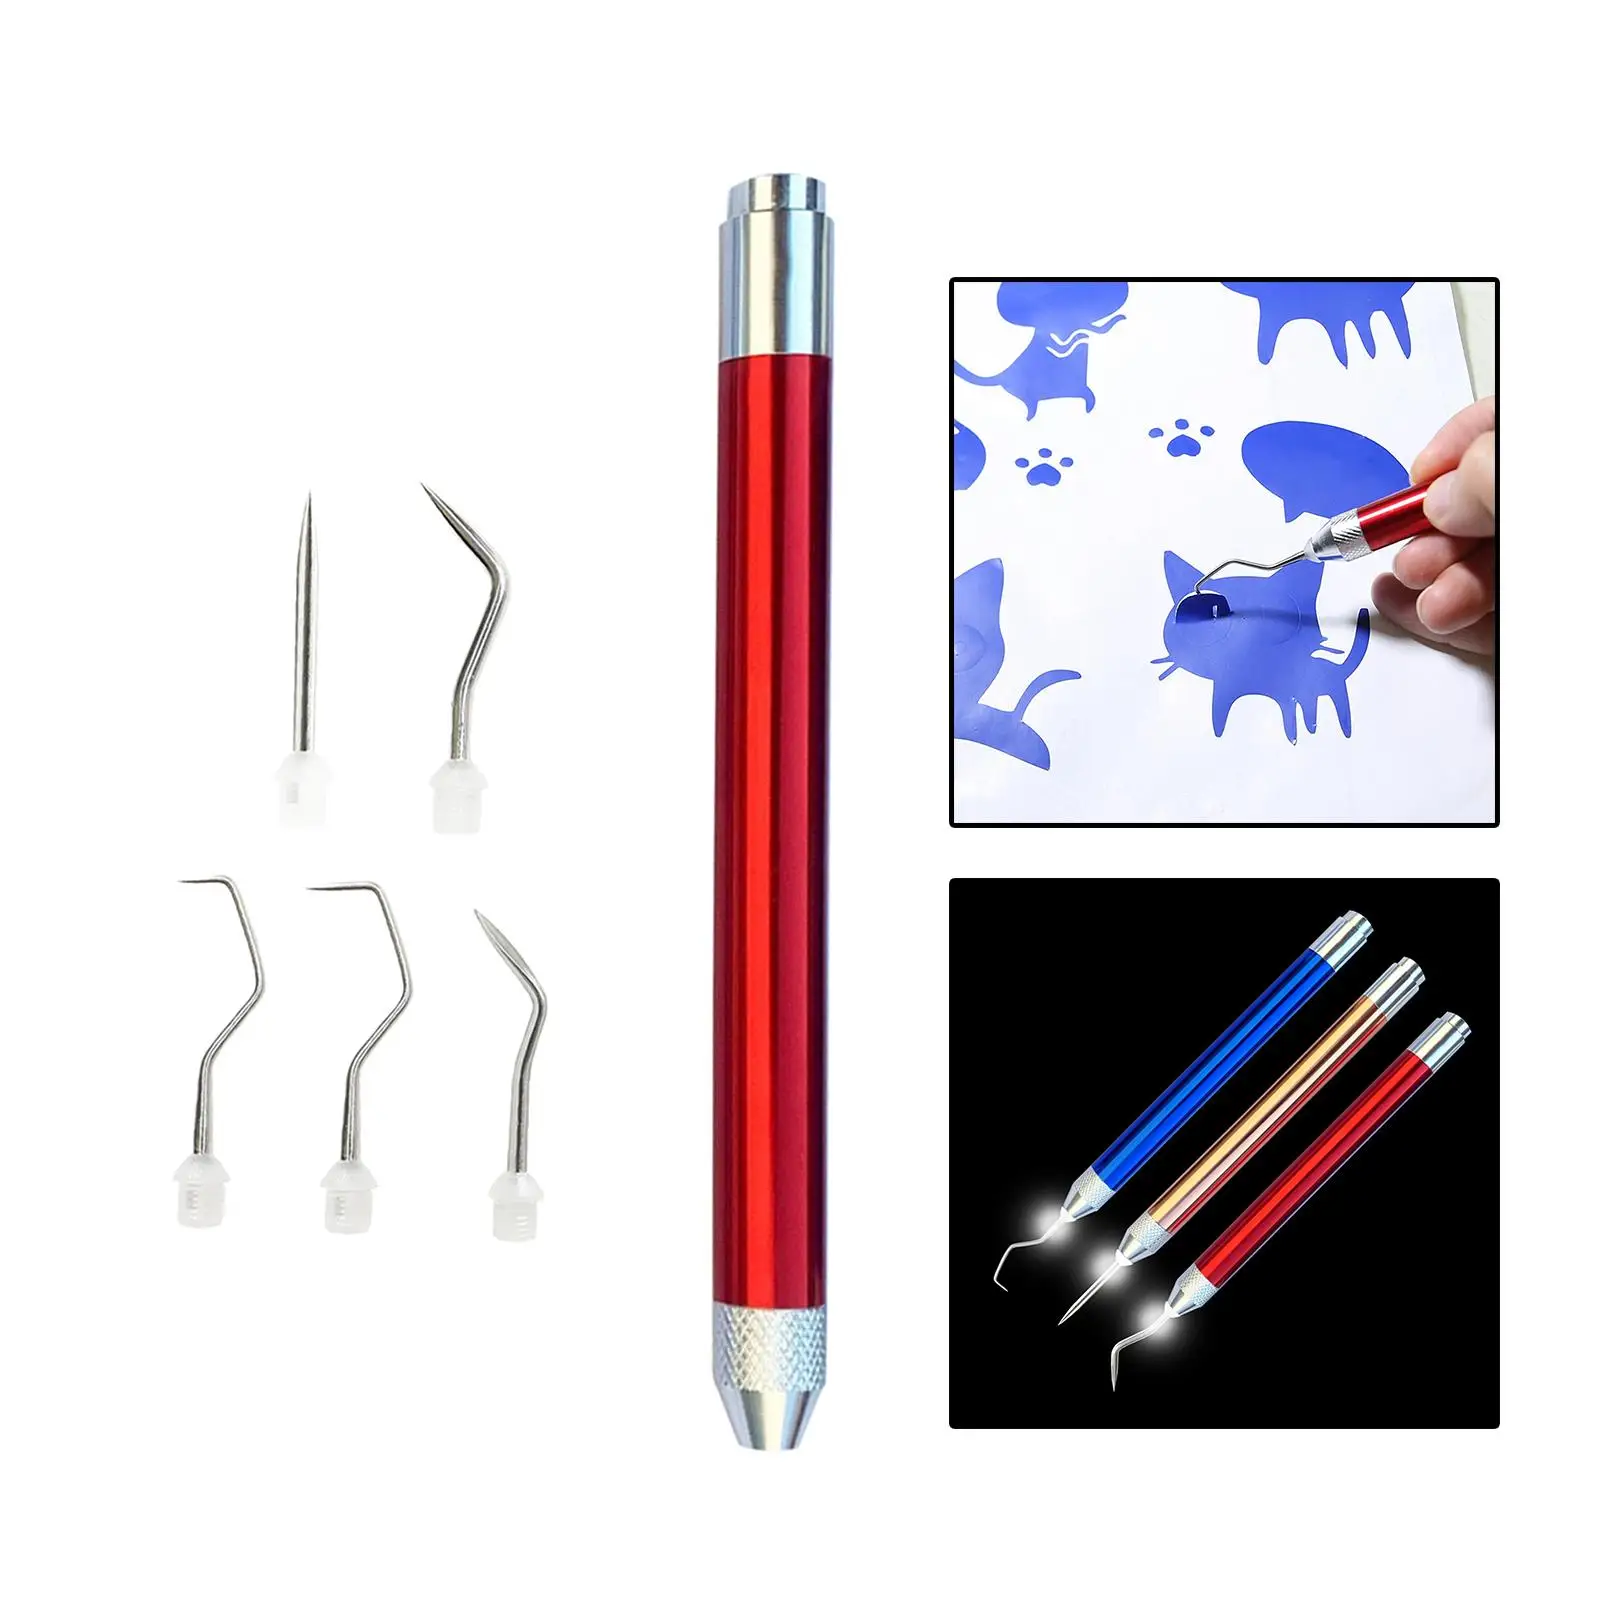 Weeding Tool with Light Silhouettes Removal Practical Lettering Easy to Use Craft for DIY Art Work Cutting Hobby Scrapbook